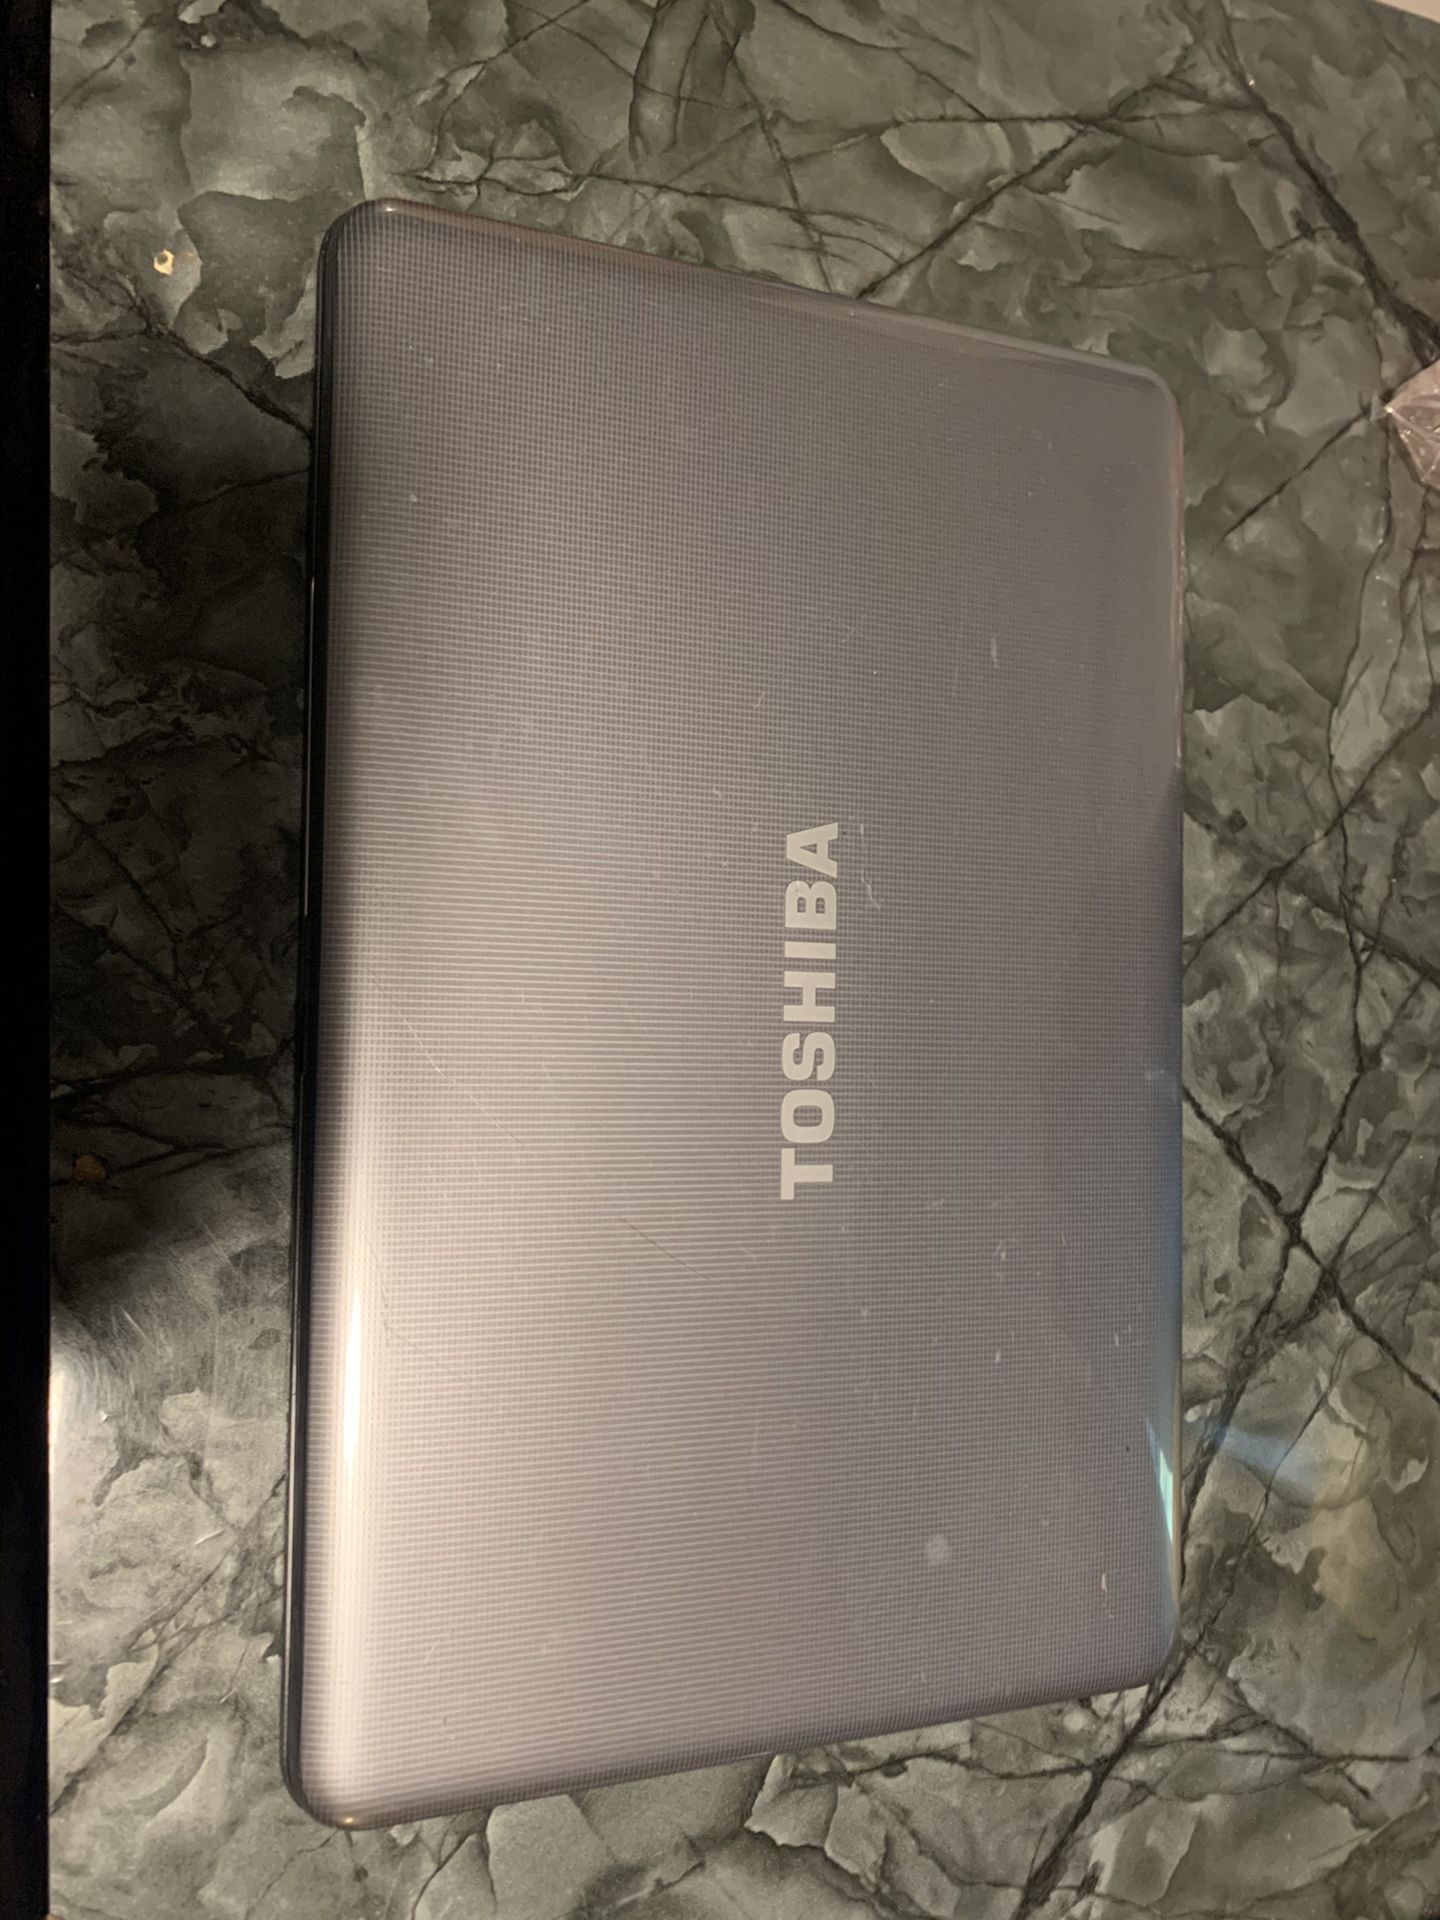 TOSHIBA LAPTOP GREAT FOR MOVIES WINDOWS 10PRO AMD MORE